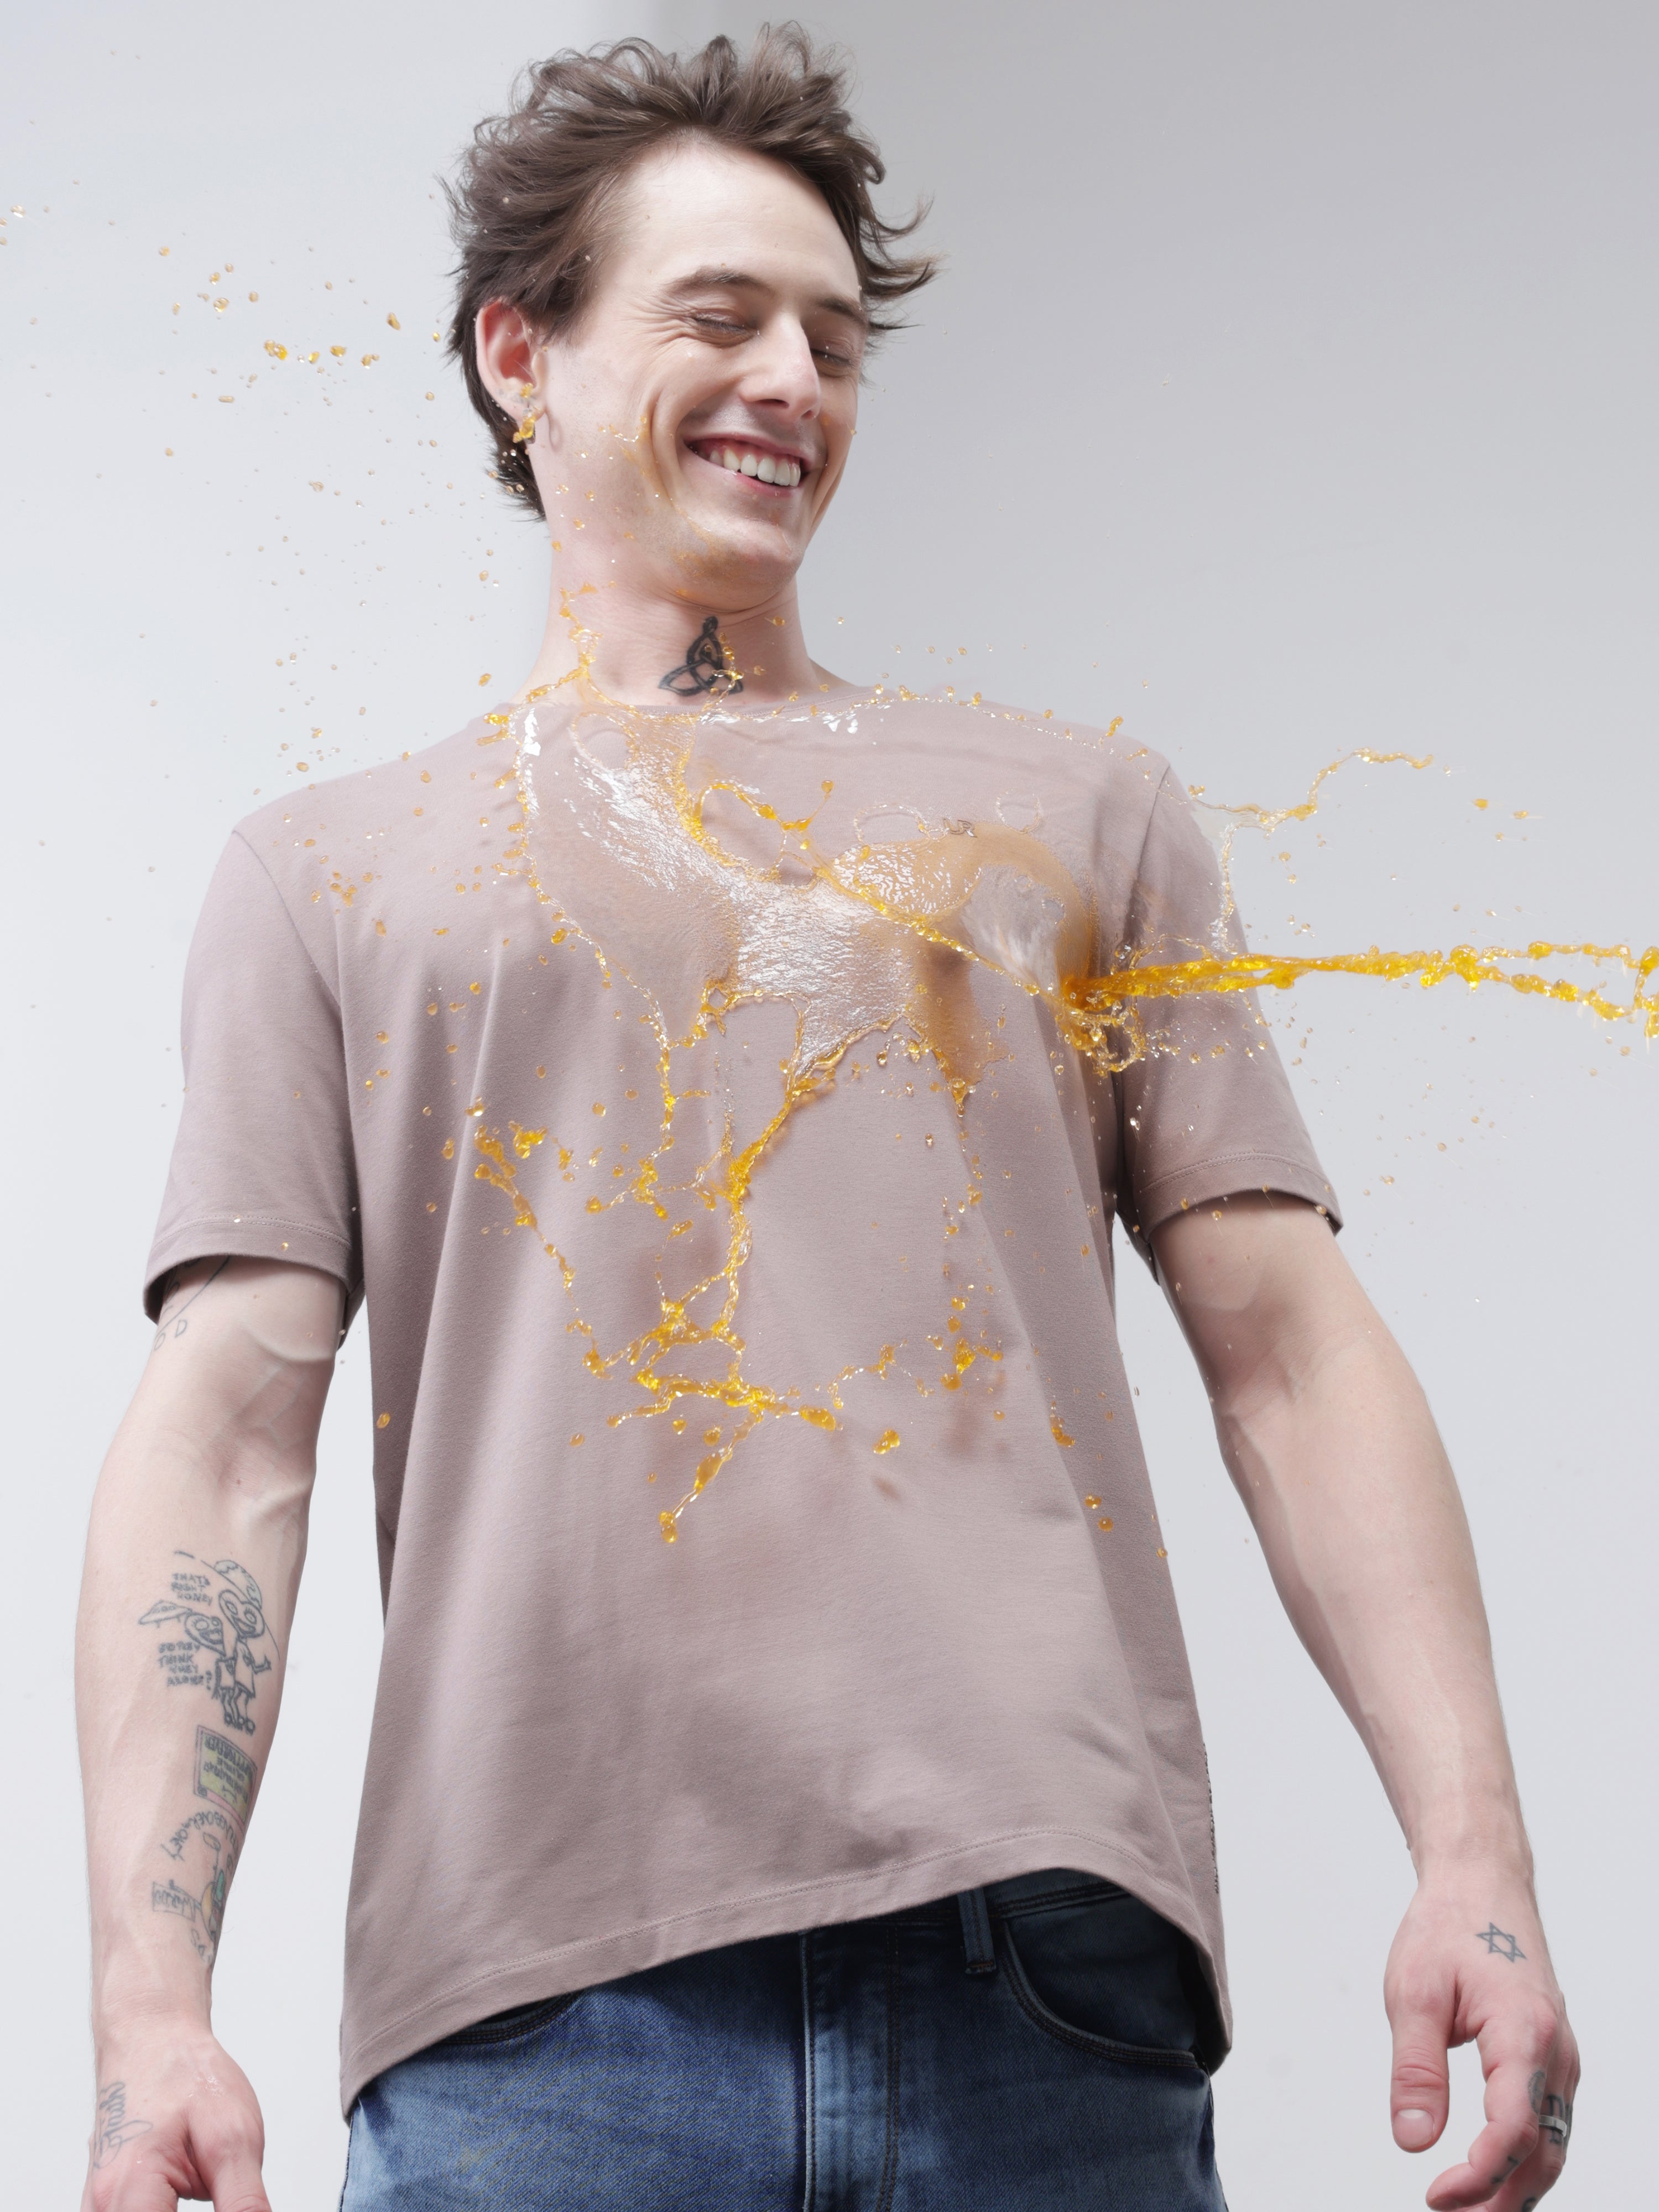 Man wearing a stain-proof Dusky Maroon Turms T-shirt, smiling as liquid spills on his shirt. Round neck, tailored fit, stylish and odor-resistant.